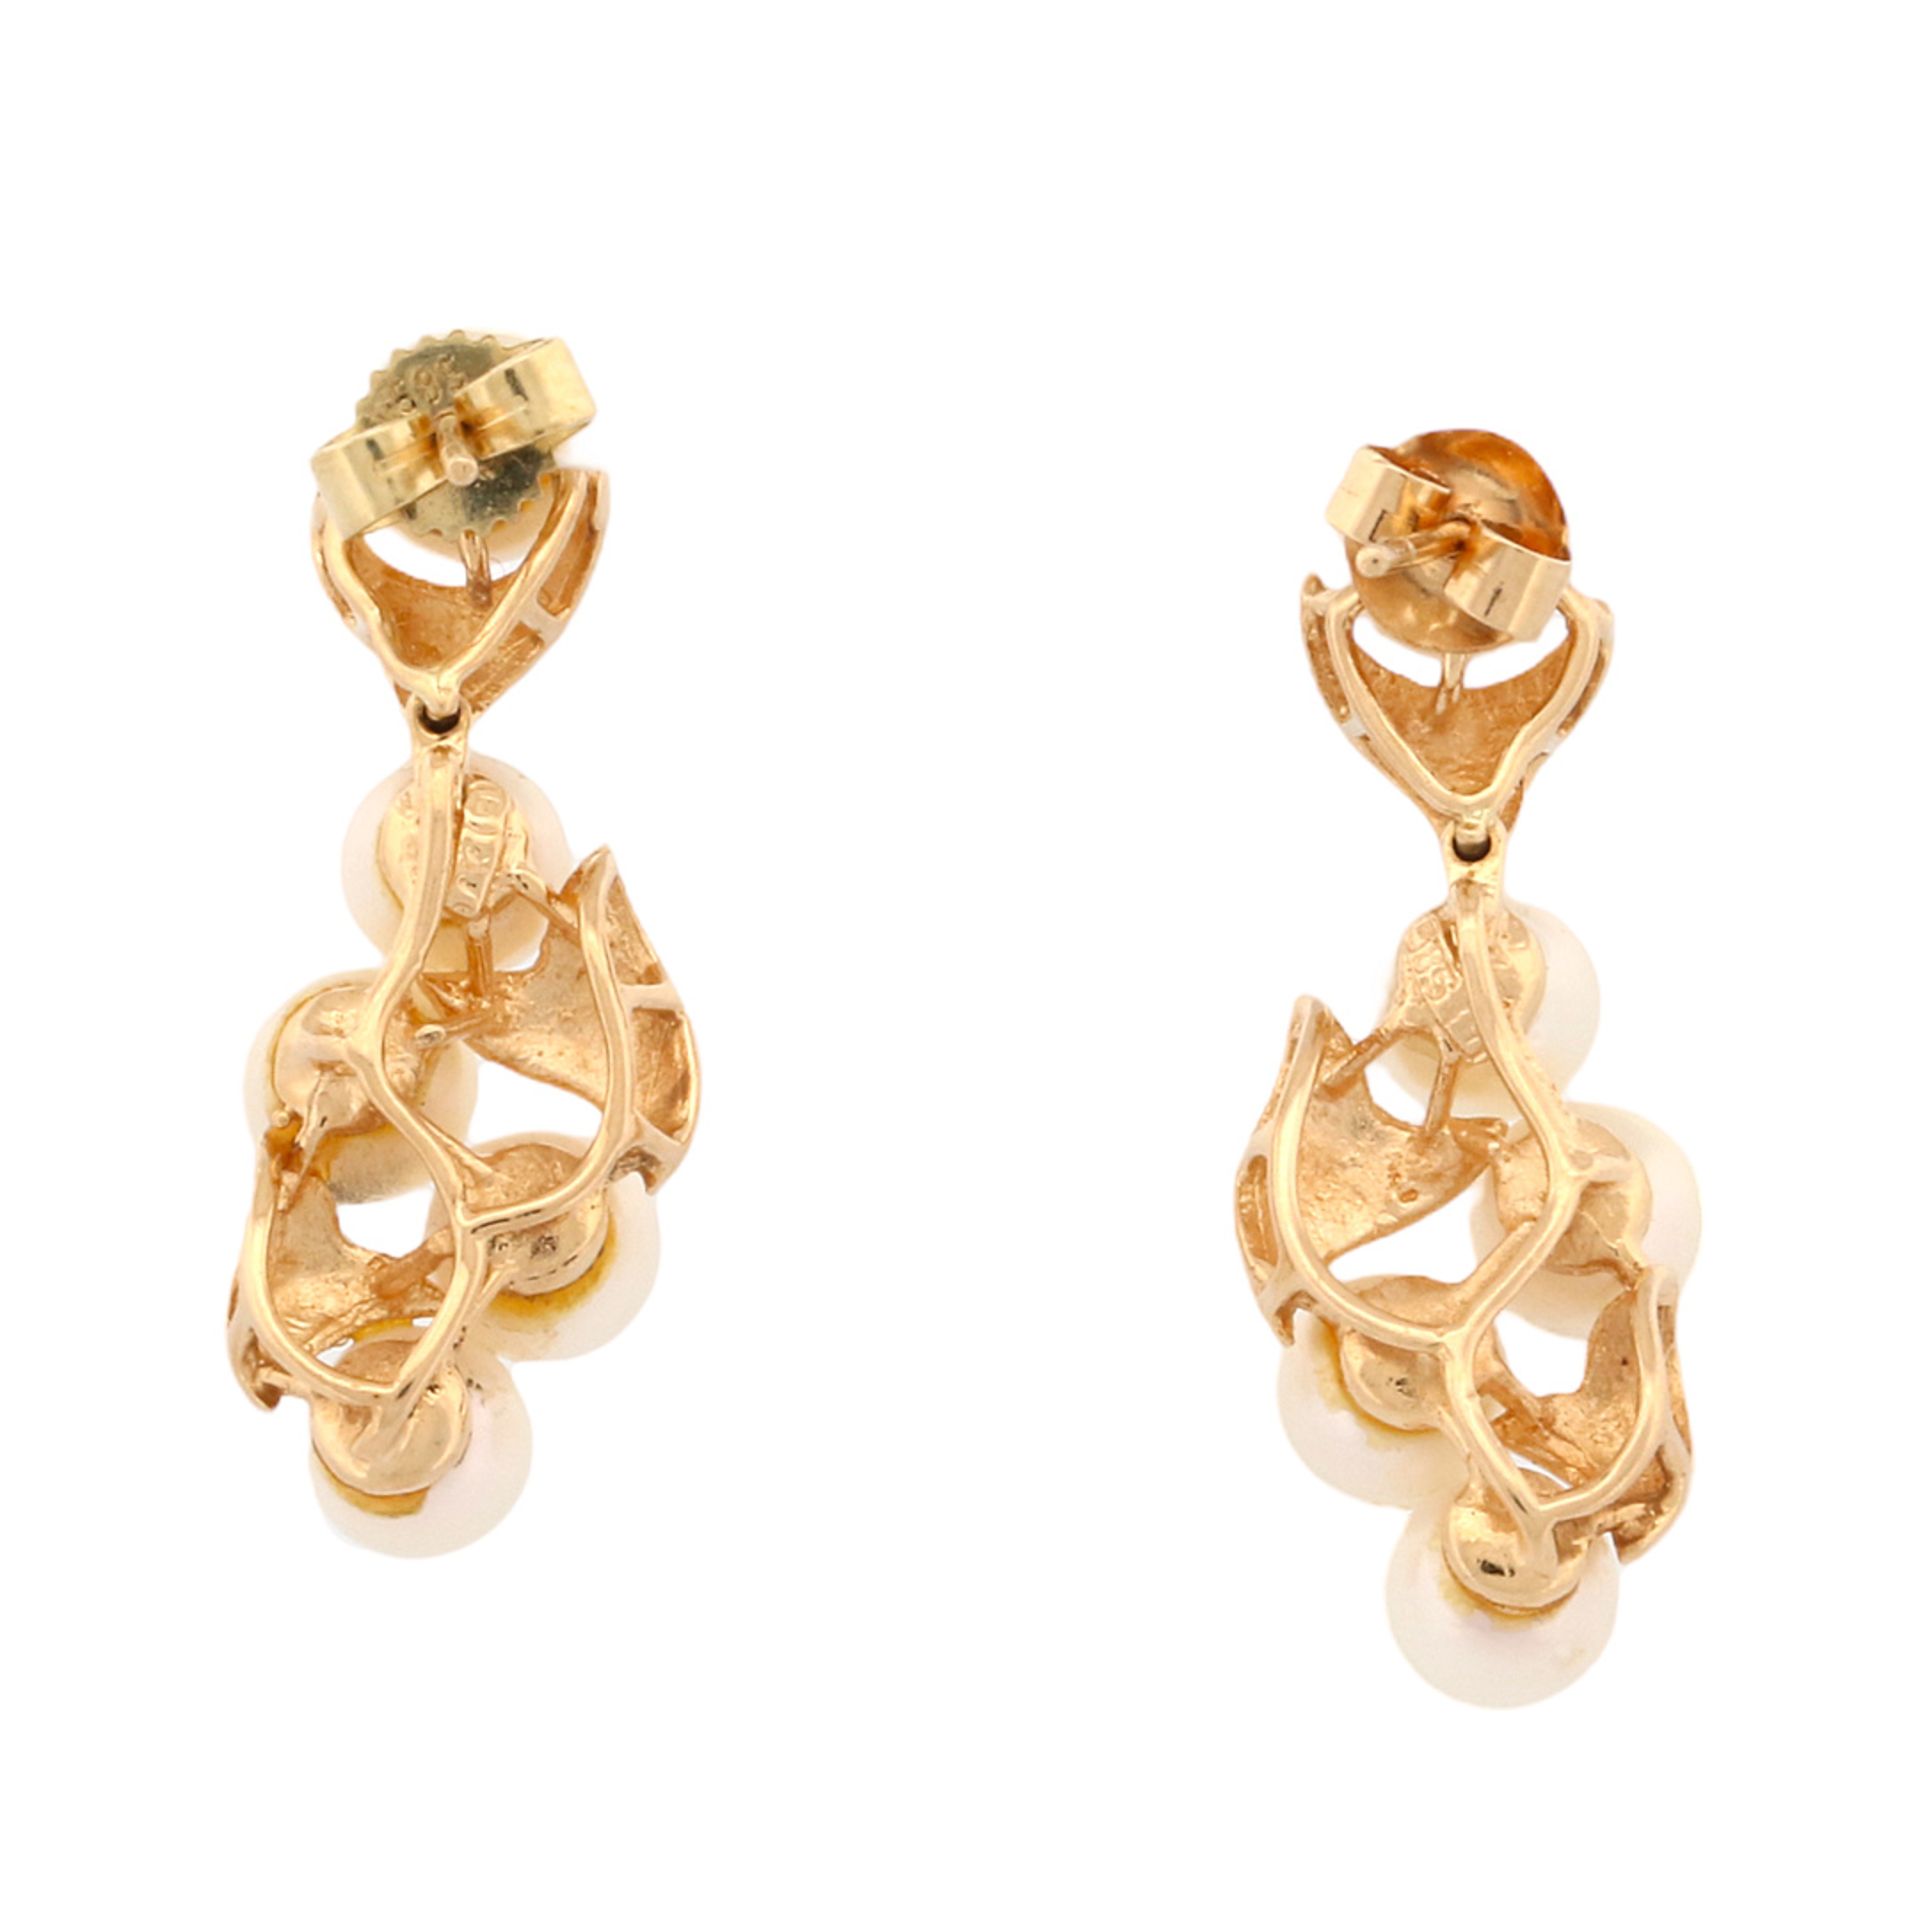 Stud earrings with pearls - Image 2 of 2